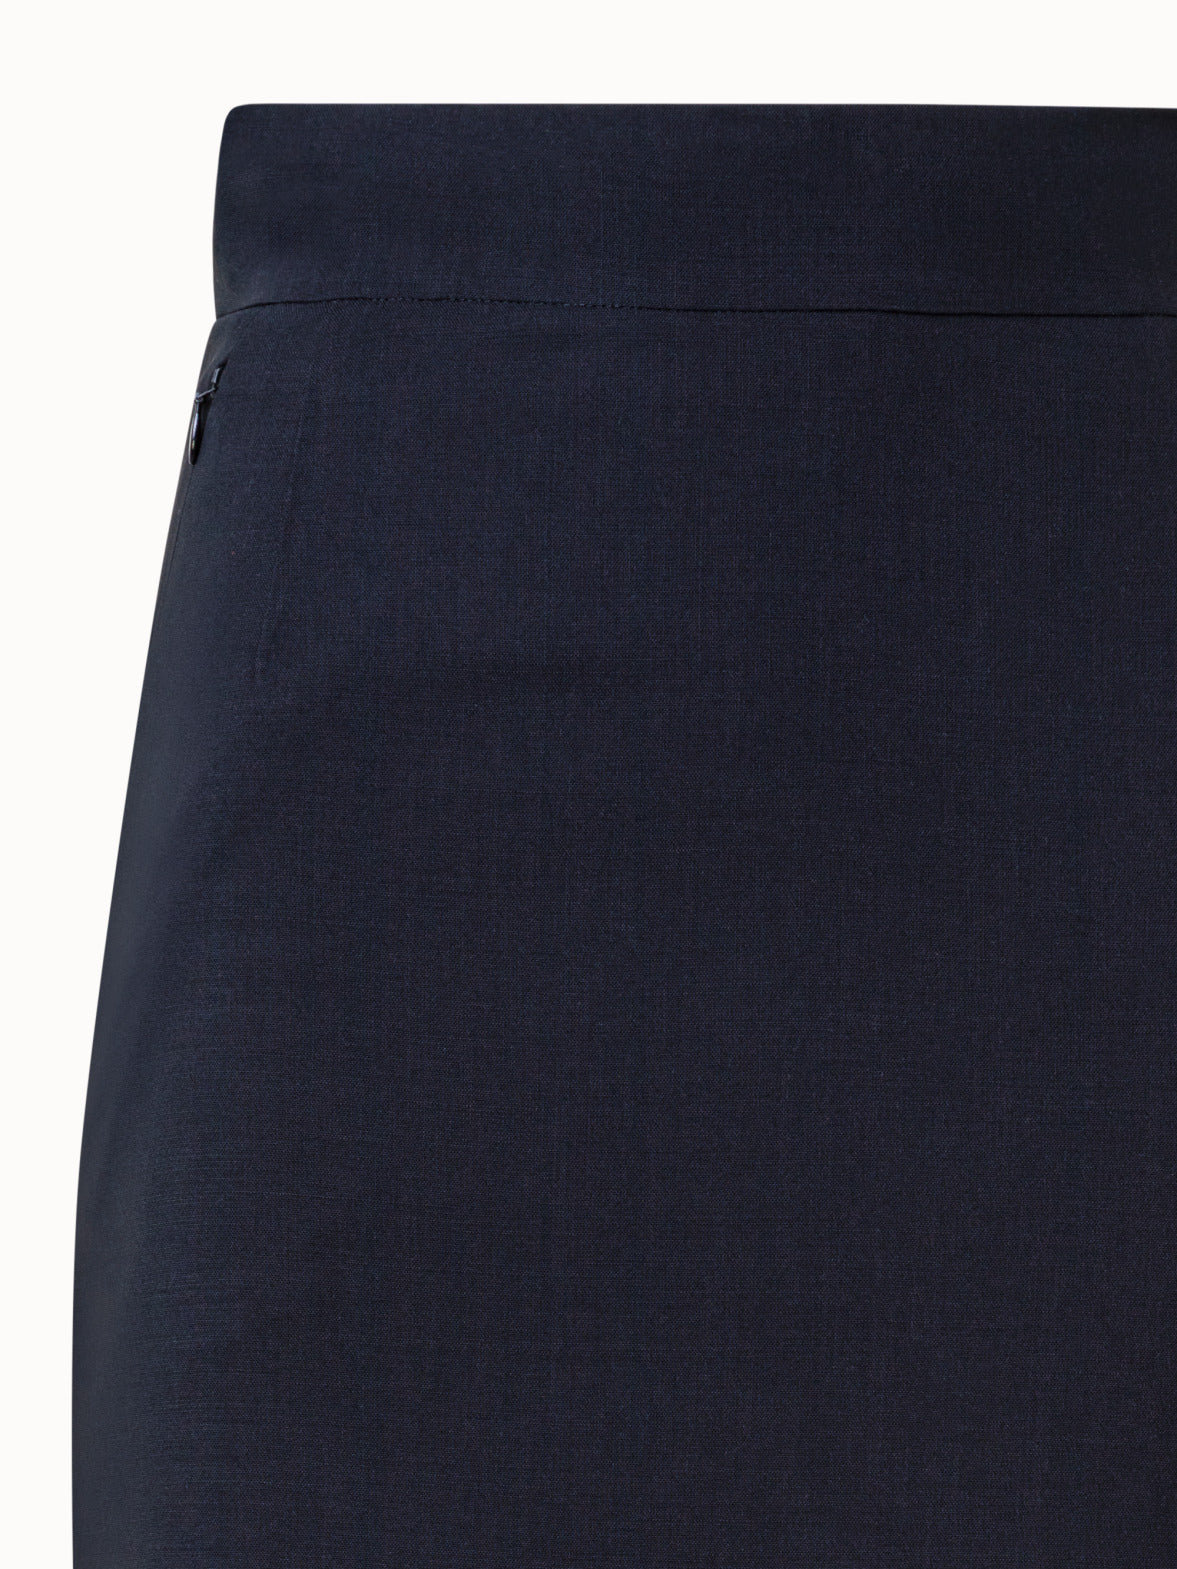 Pencil Skirt from Wool Double-Face with Back Slits